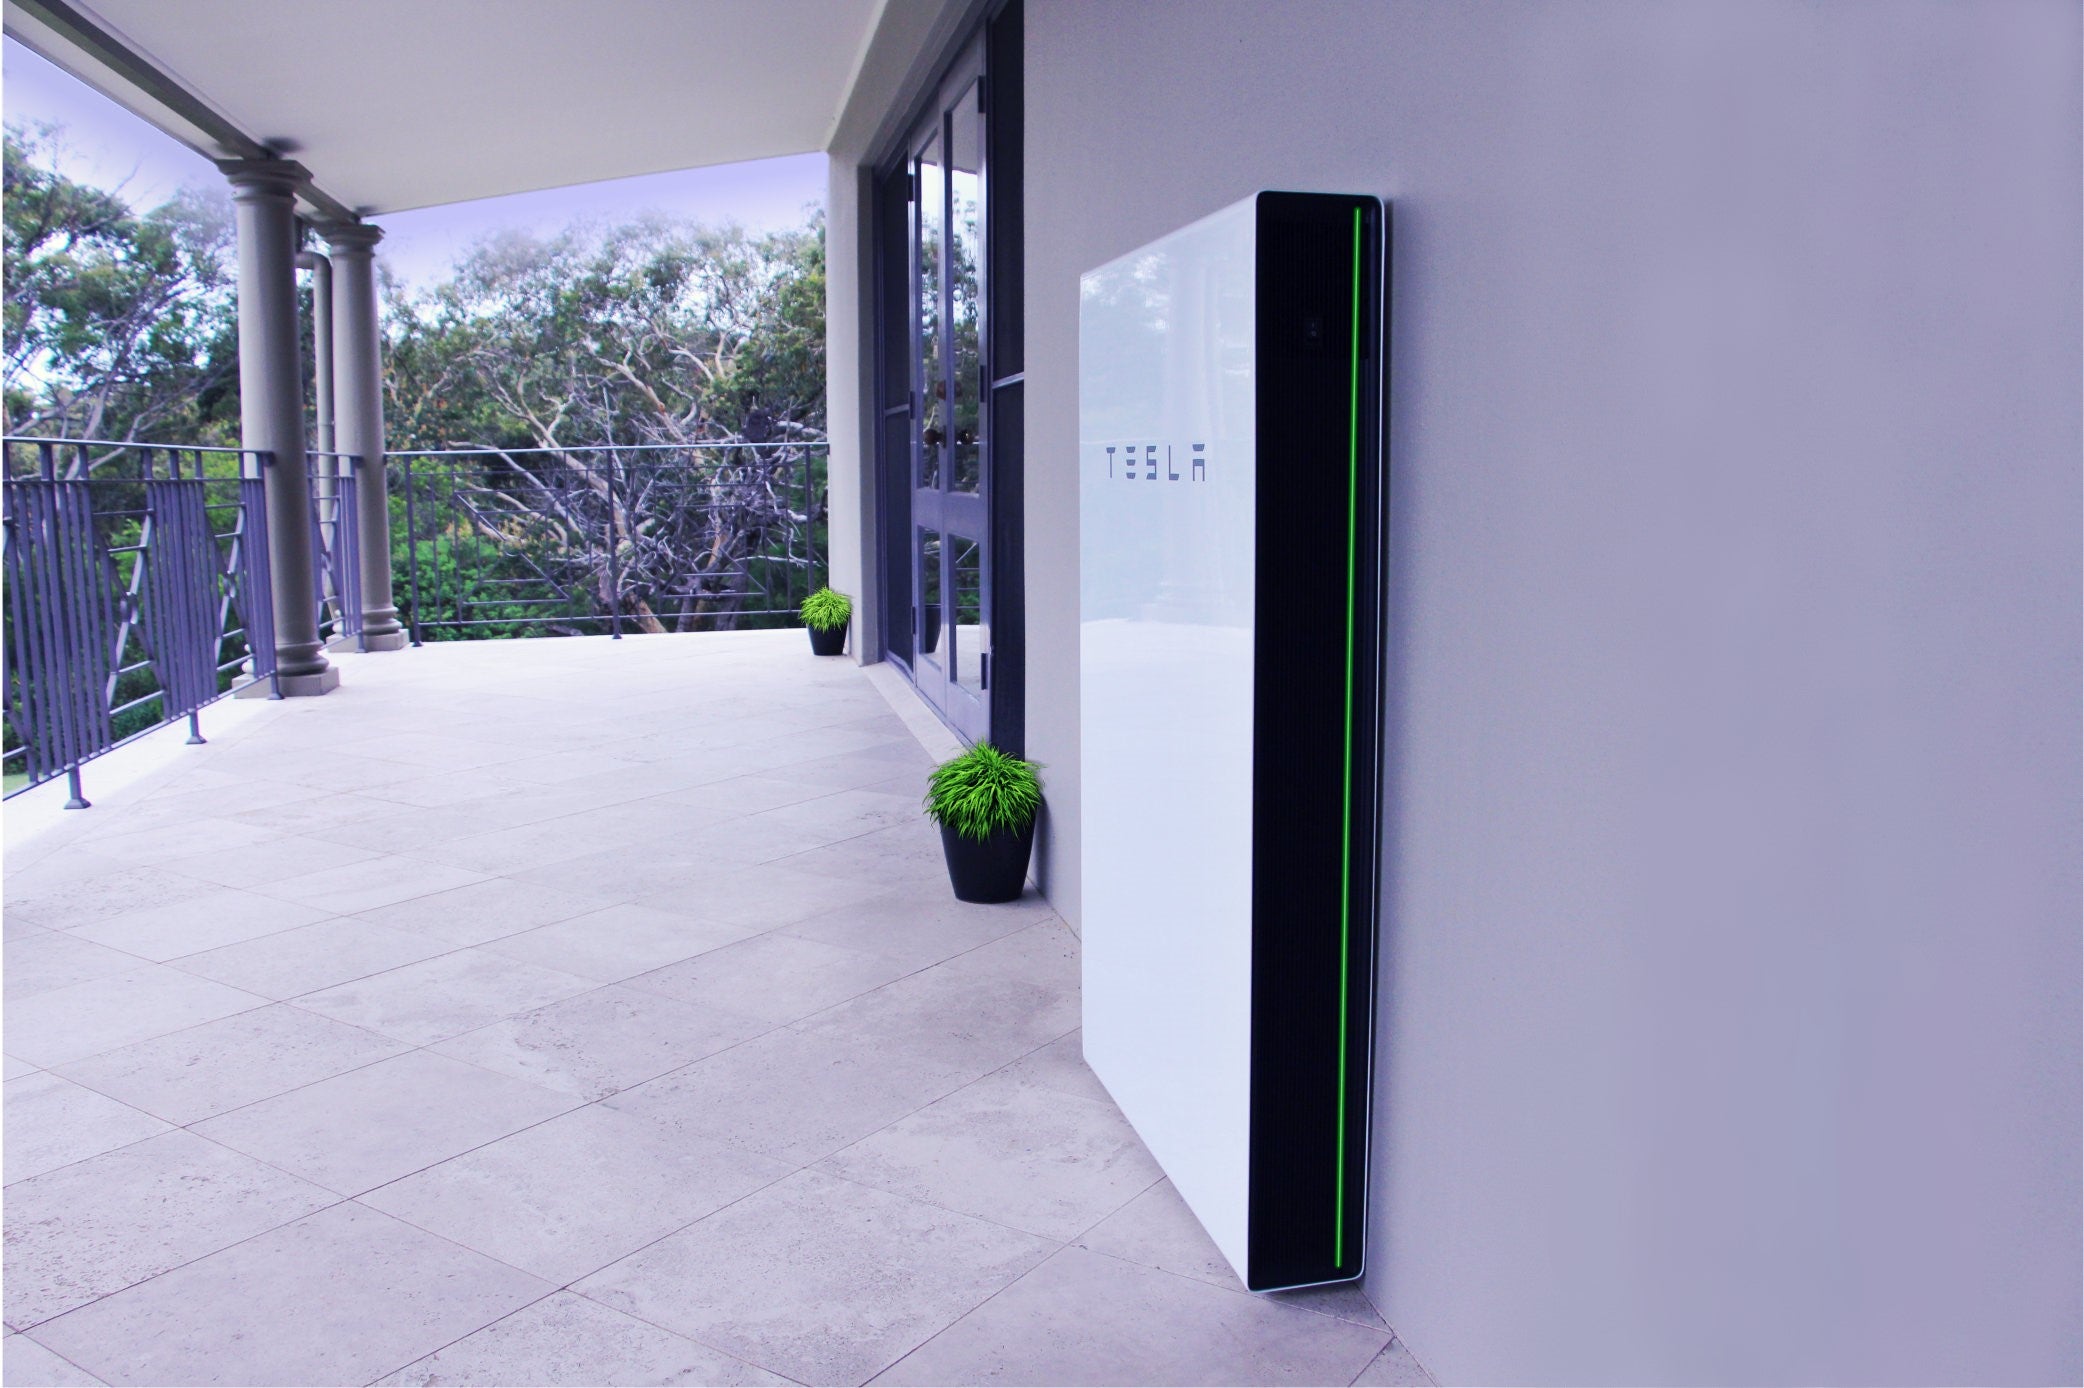 Tesla Achieved Another Milestone Of Installed the 100,000th Powerwall